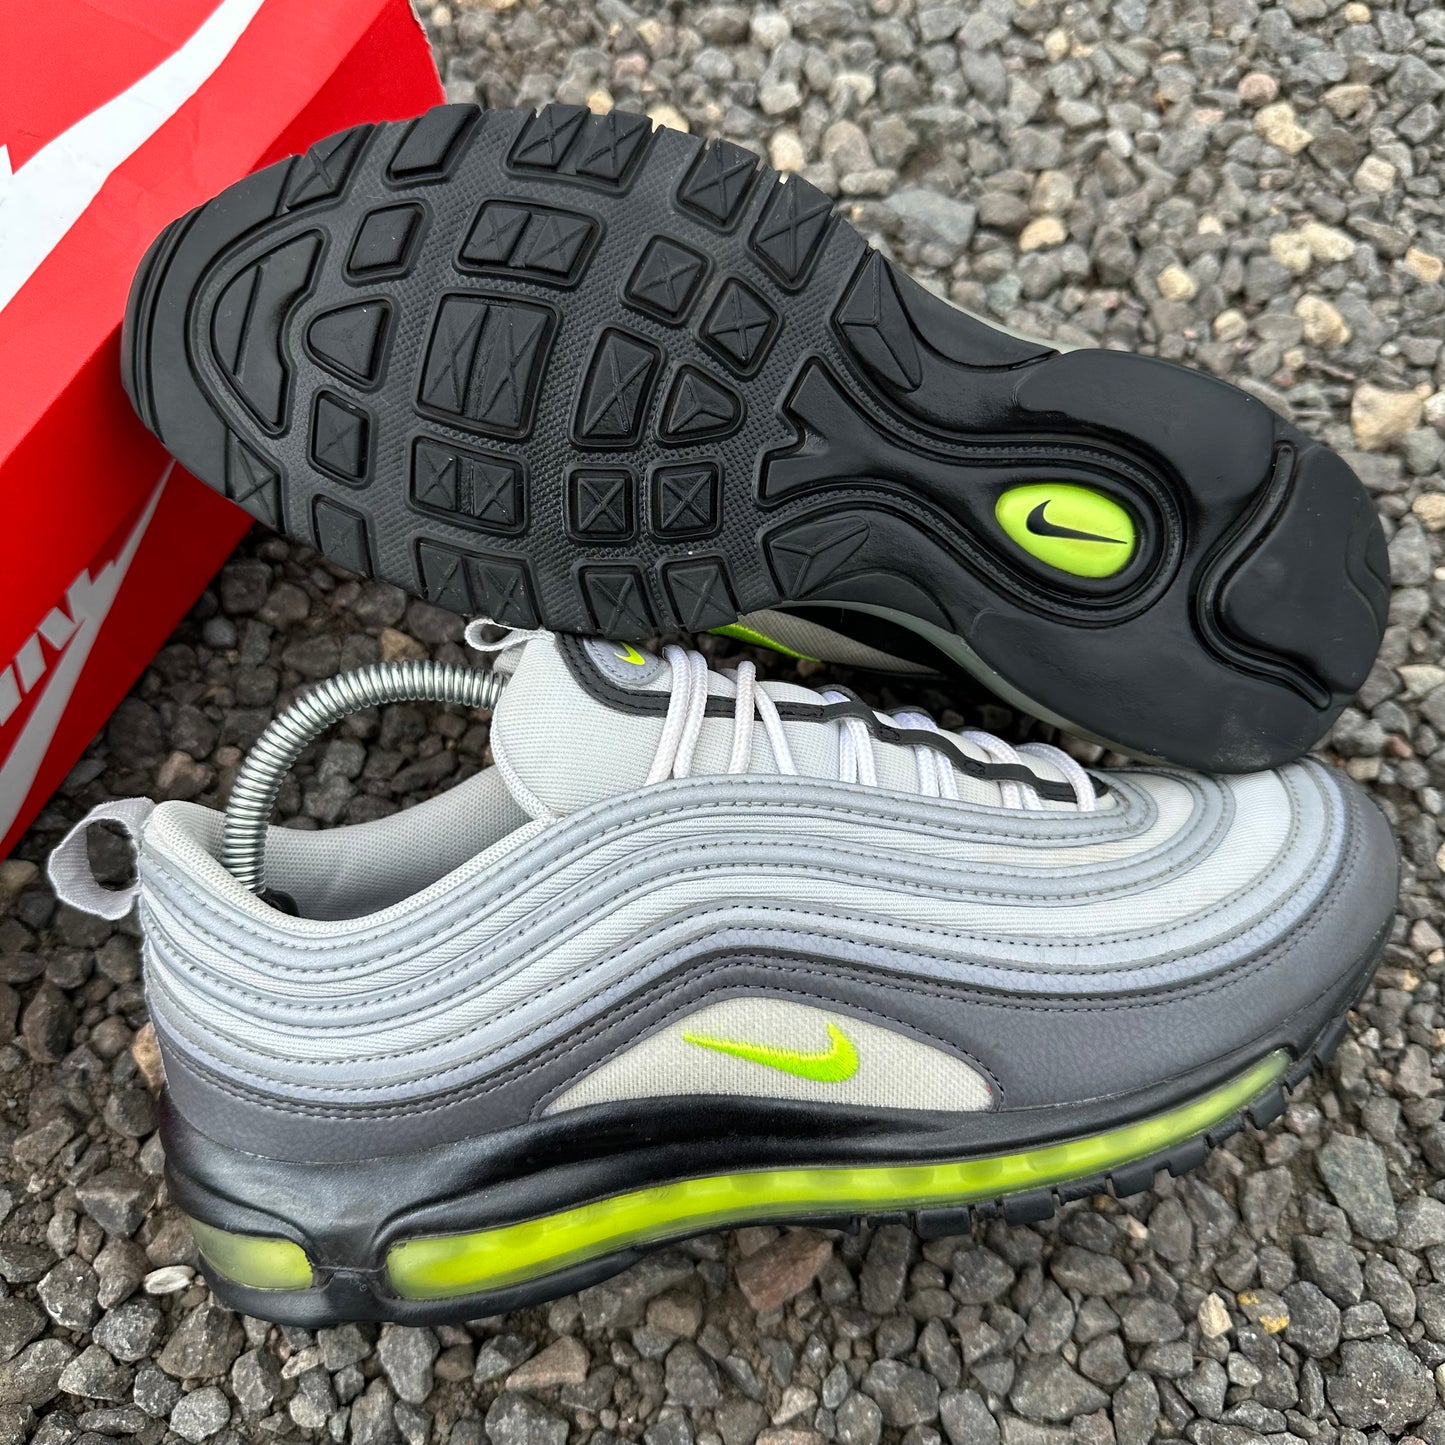 Used Air Max 97 Neon